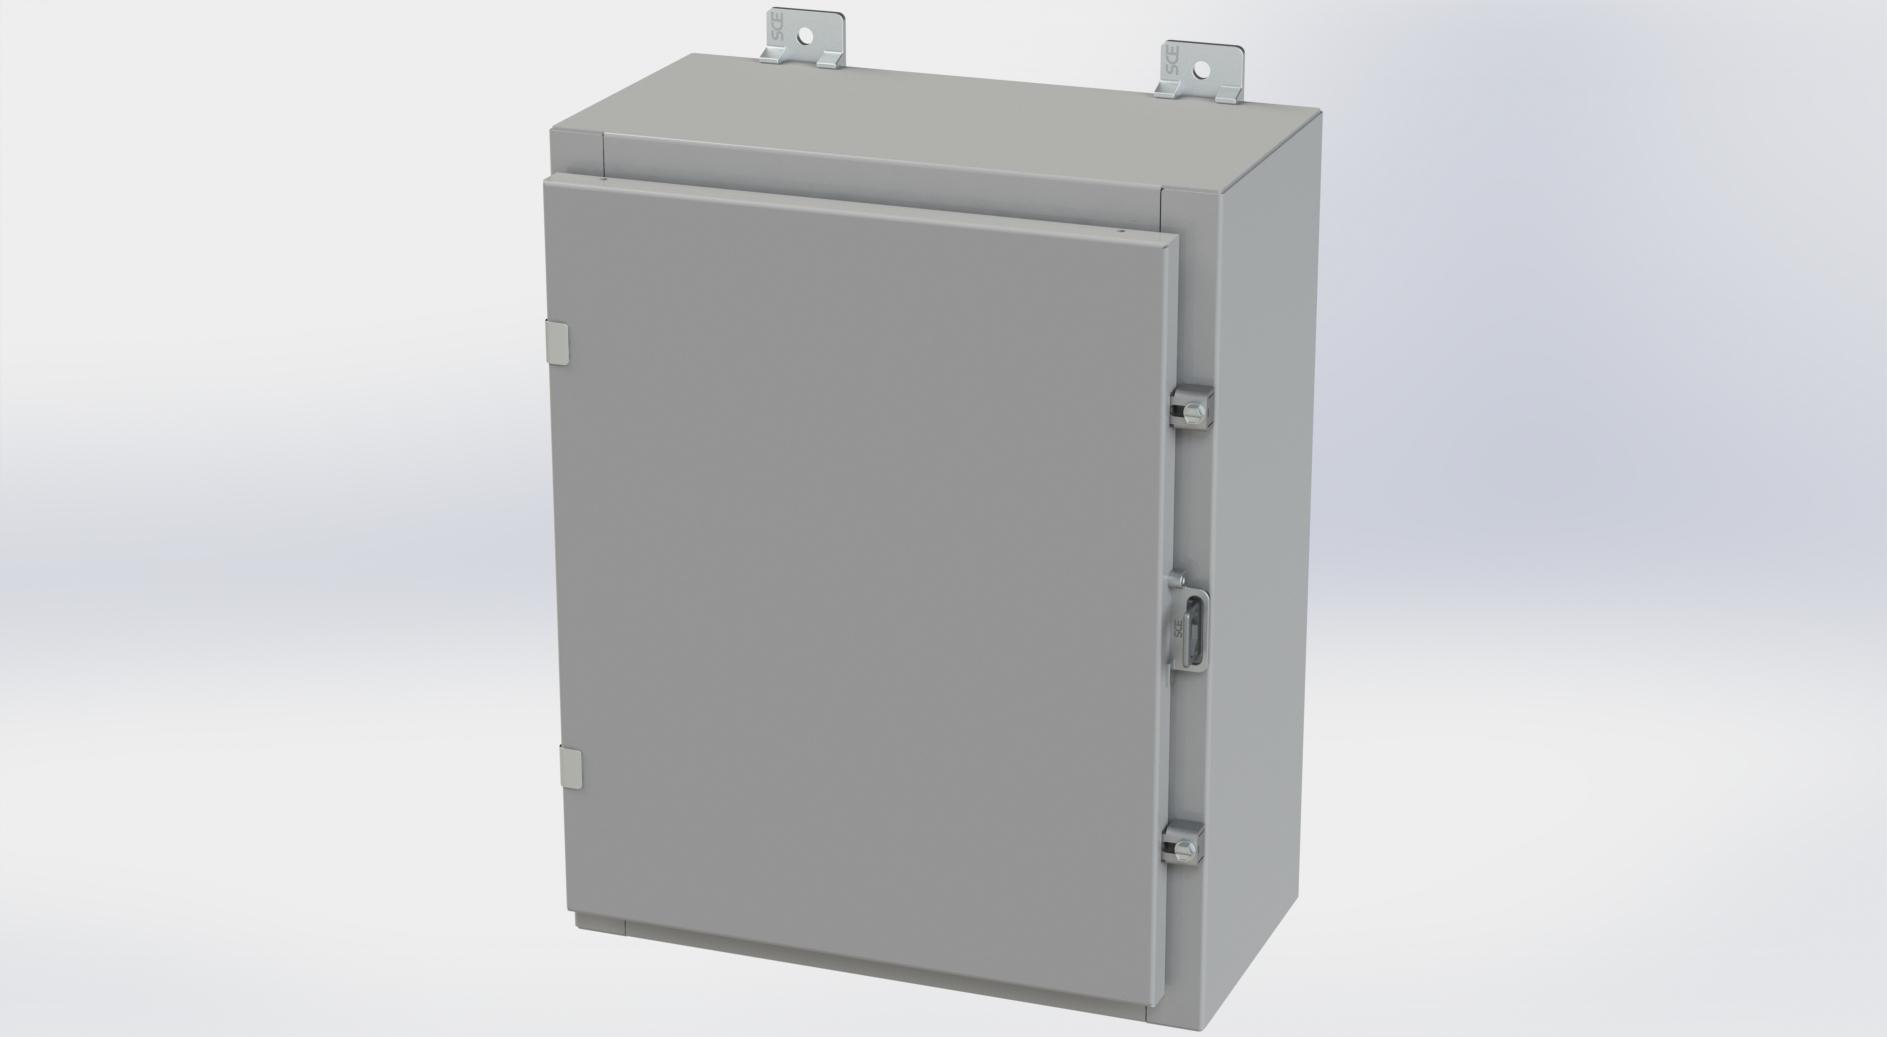 Saginaw Control SCE-20H1608LP Nema 4 LP Enclosure, Height:20.00", Width:16.00", Depth:8.00", ANSI-61 gray powder coating inside and out. Optional panels are powder coated white.